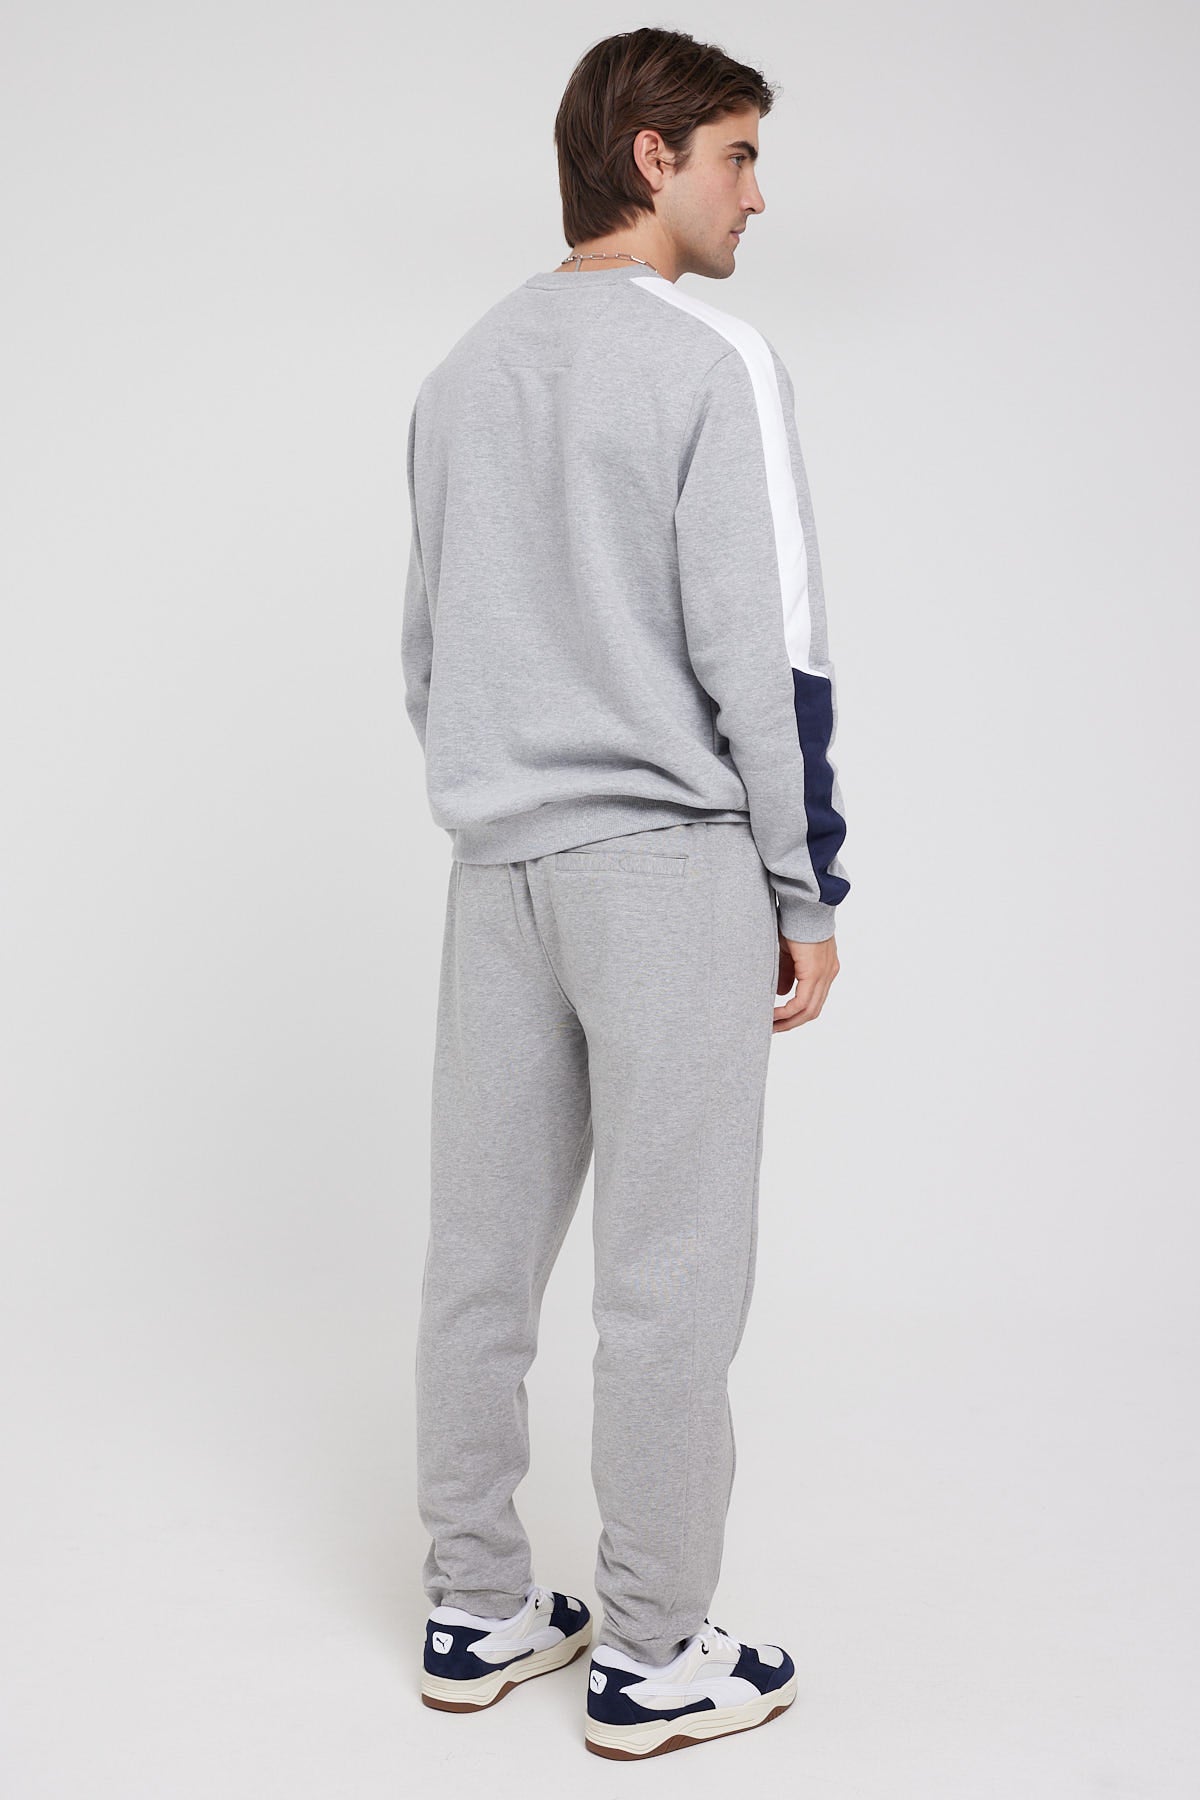 Silver Store – Universal Grey Tommy RLX Htr Luxe Jeans TJ TJM Sweatpant